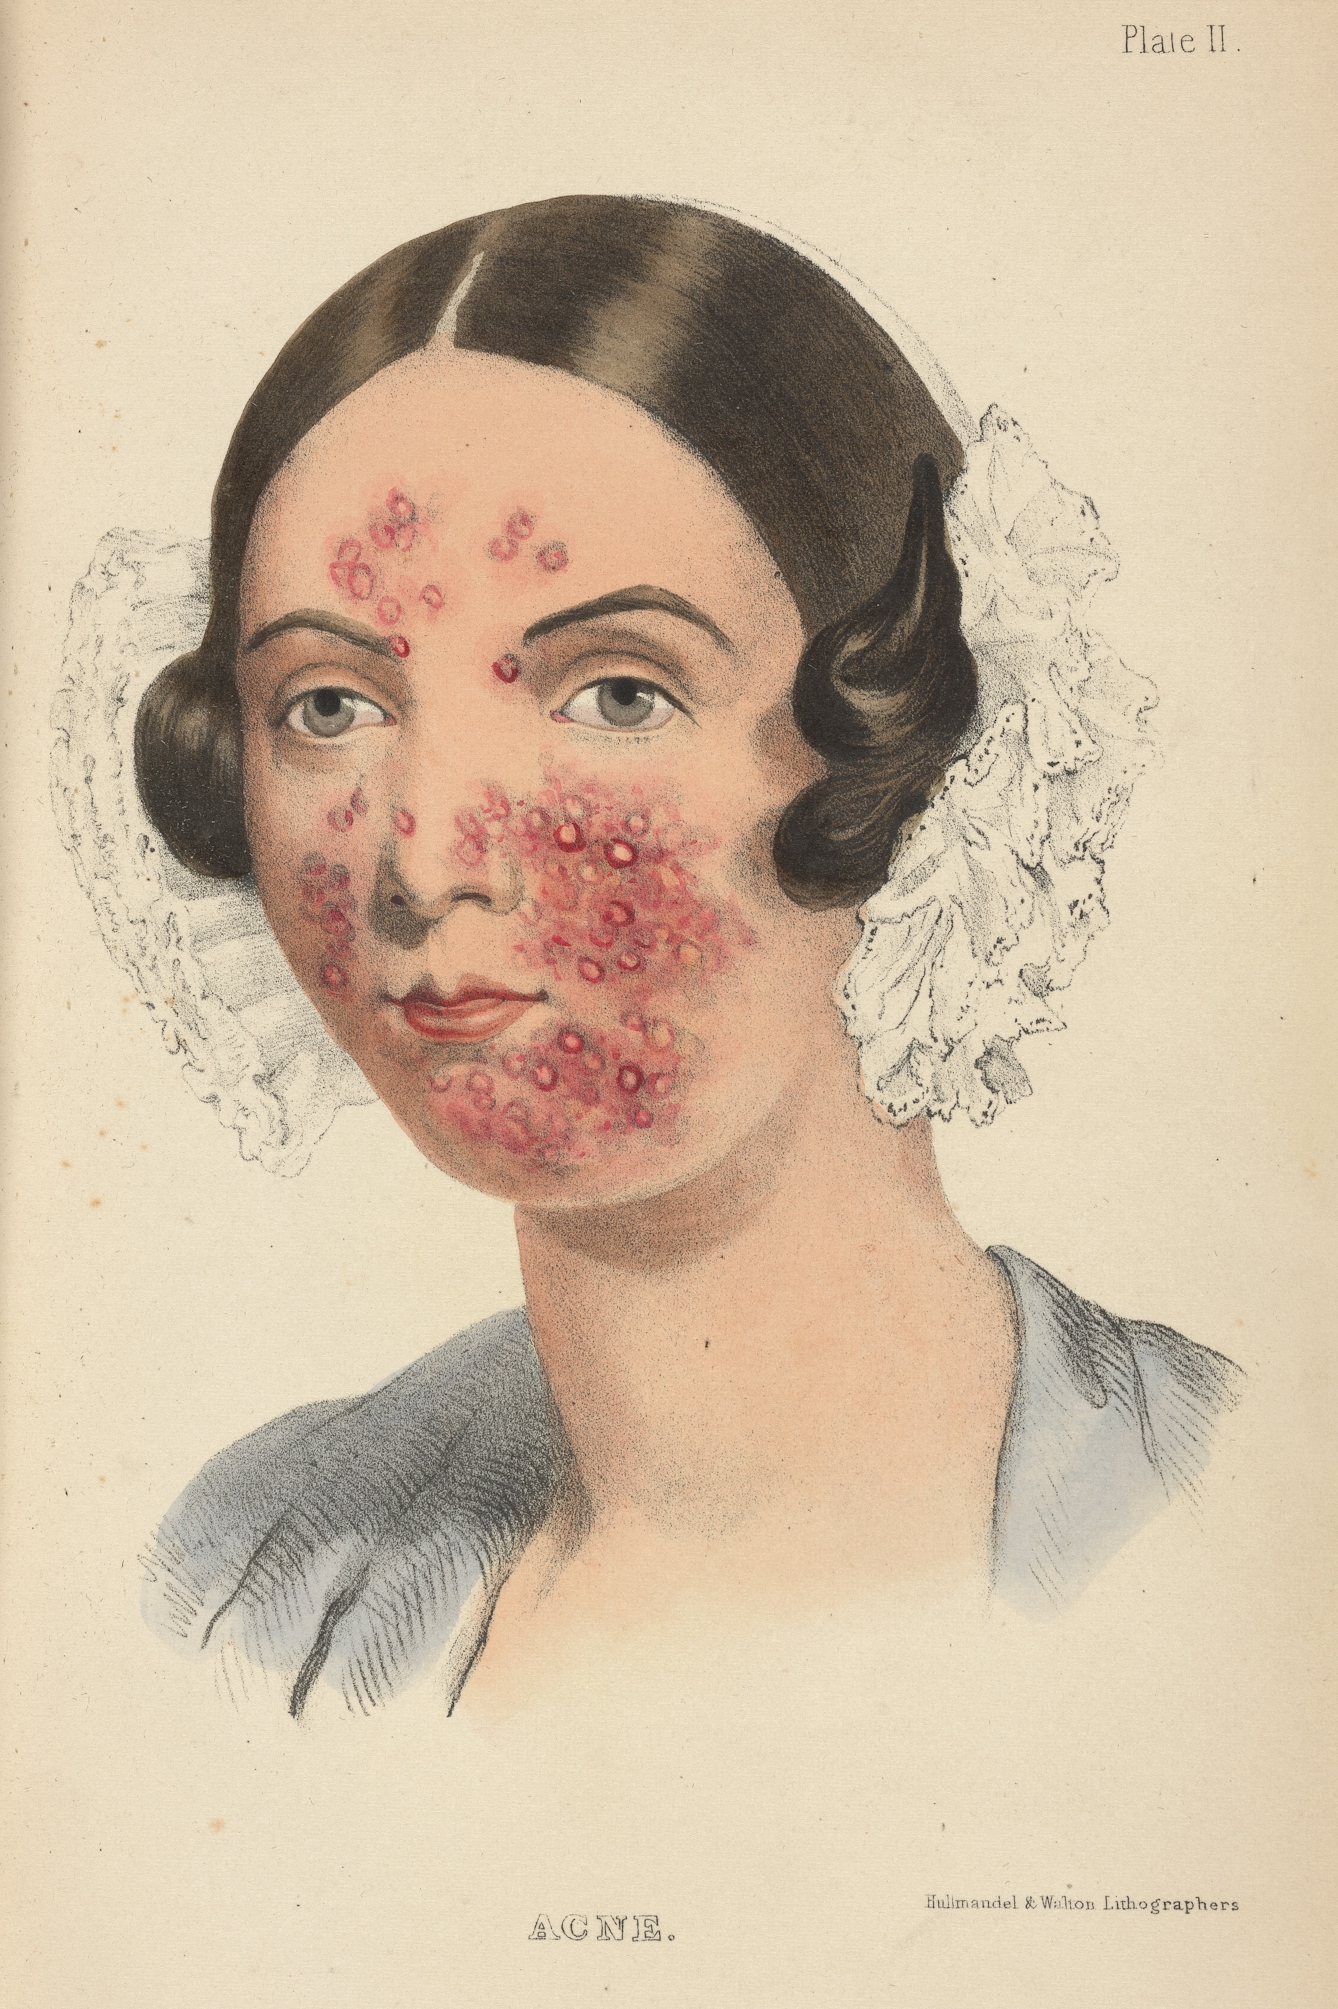 Photograph of an illustration showing the head and shoulders of a woman in a bonnet with red acne marks on her face.